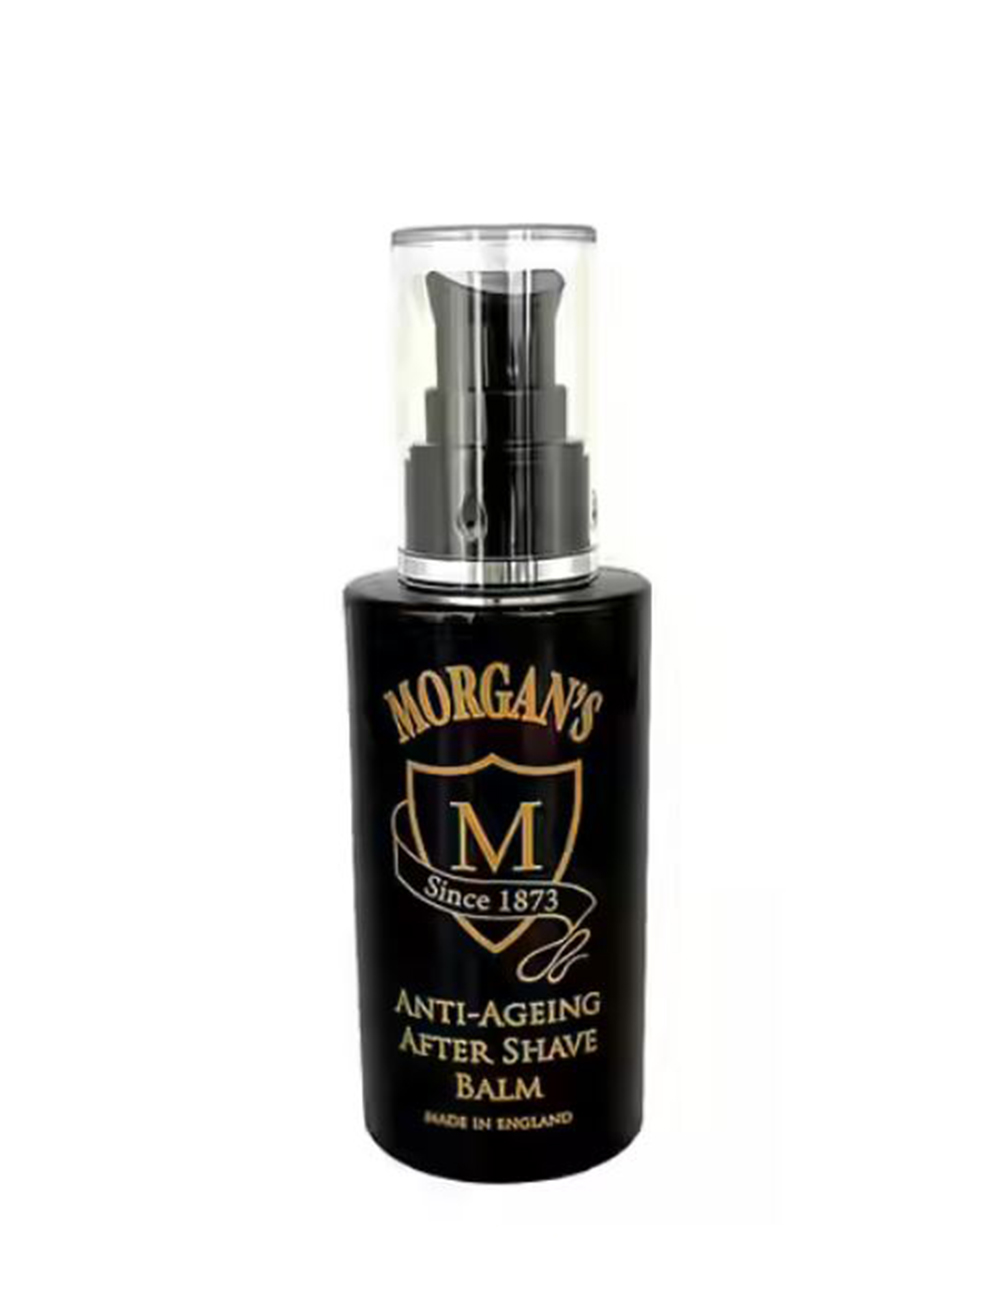 Morgans Pomade Anti-Ageing After Shave Balm 100ml Bottle